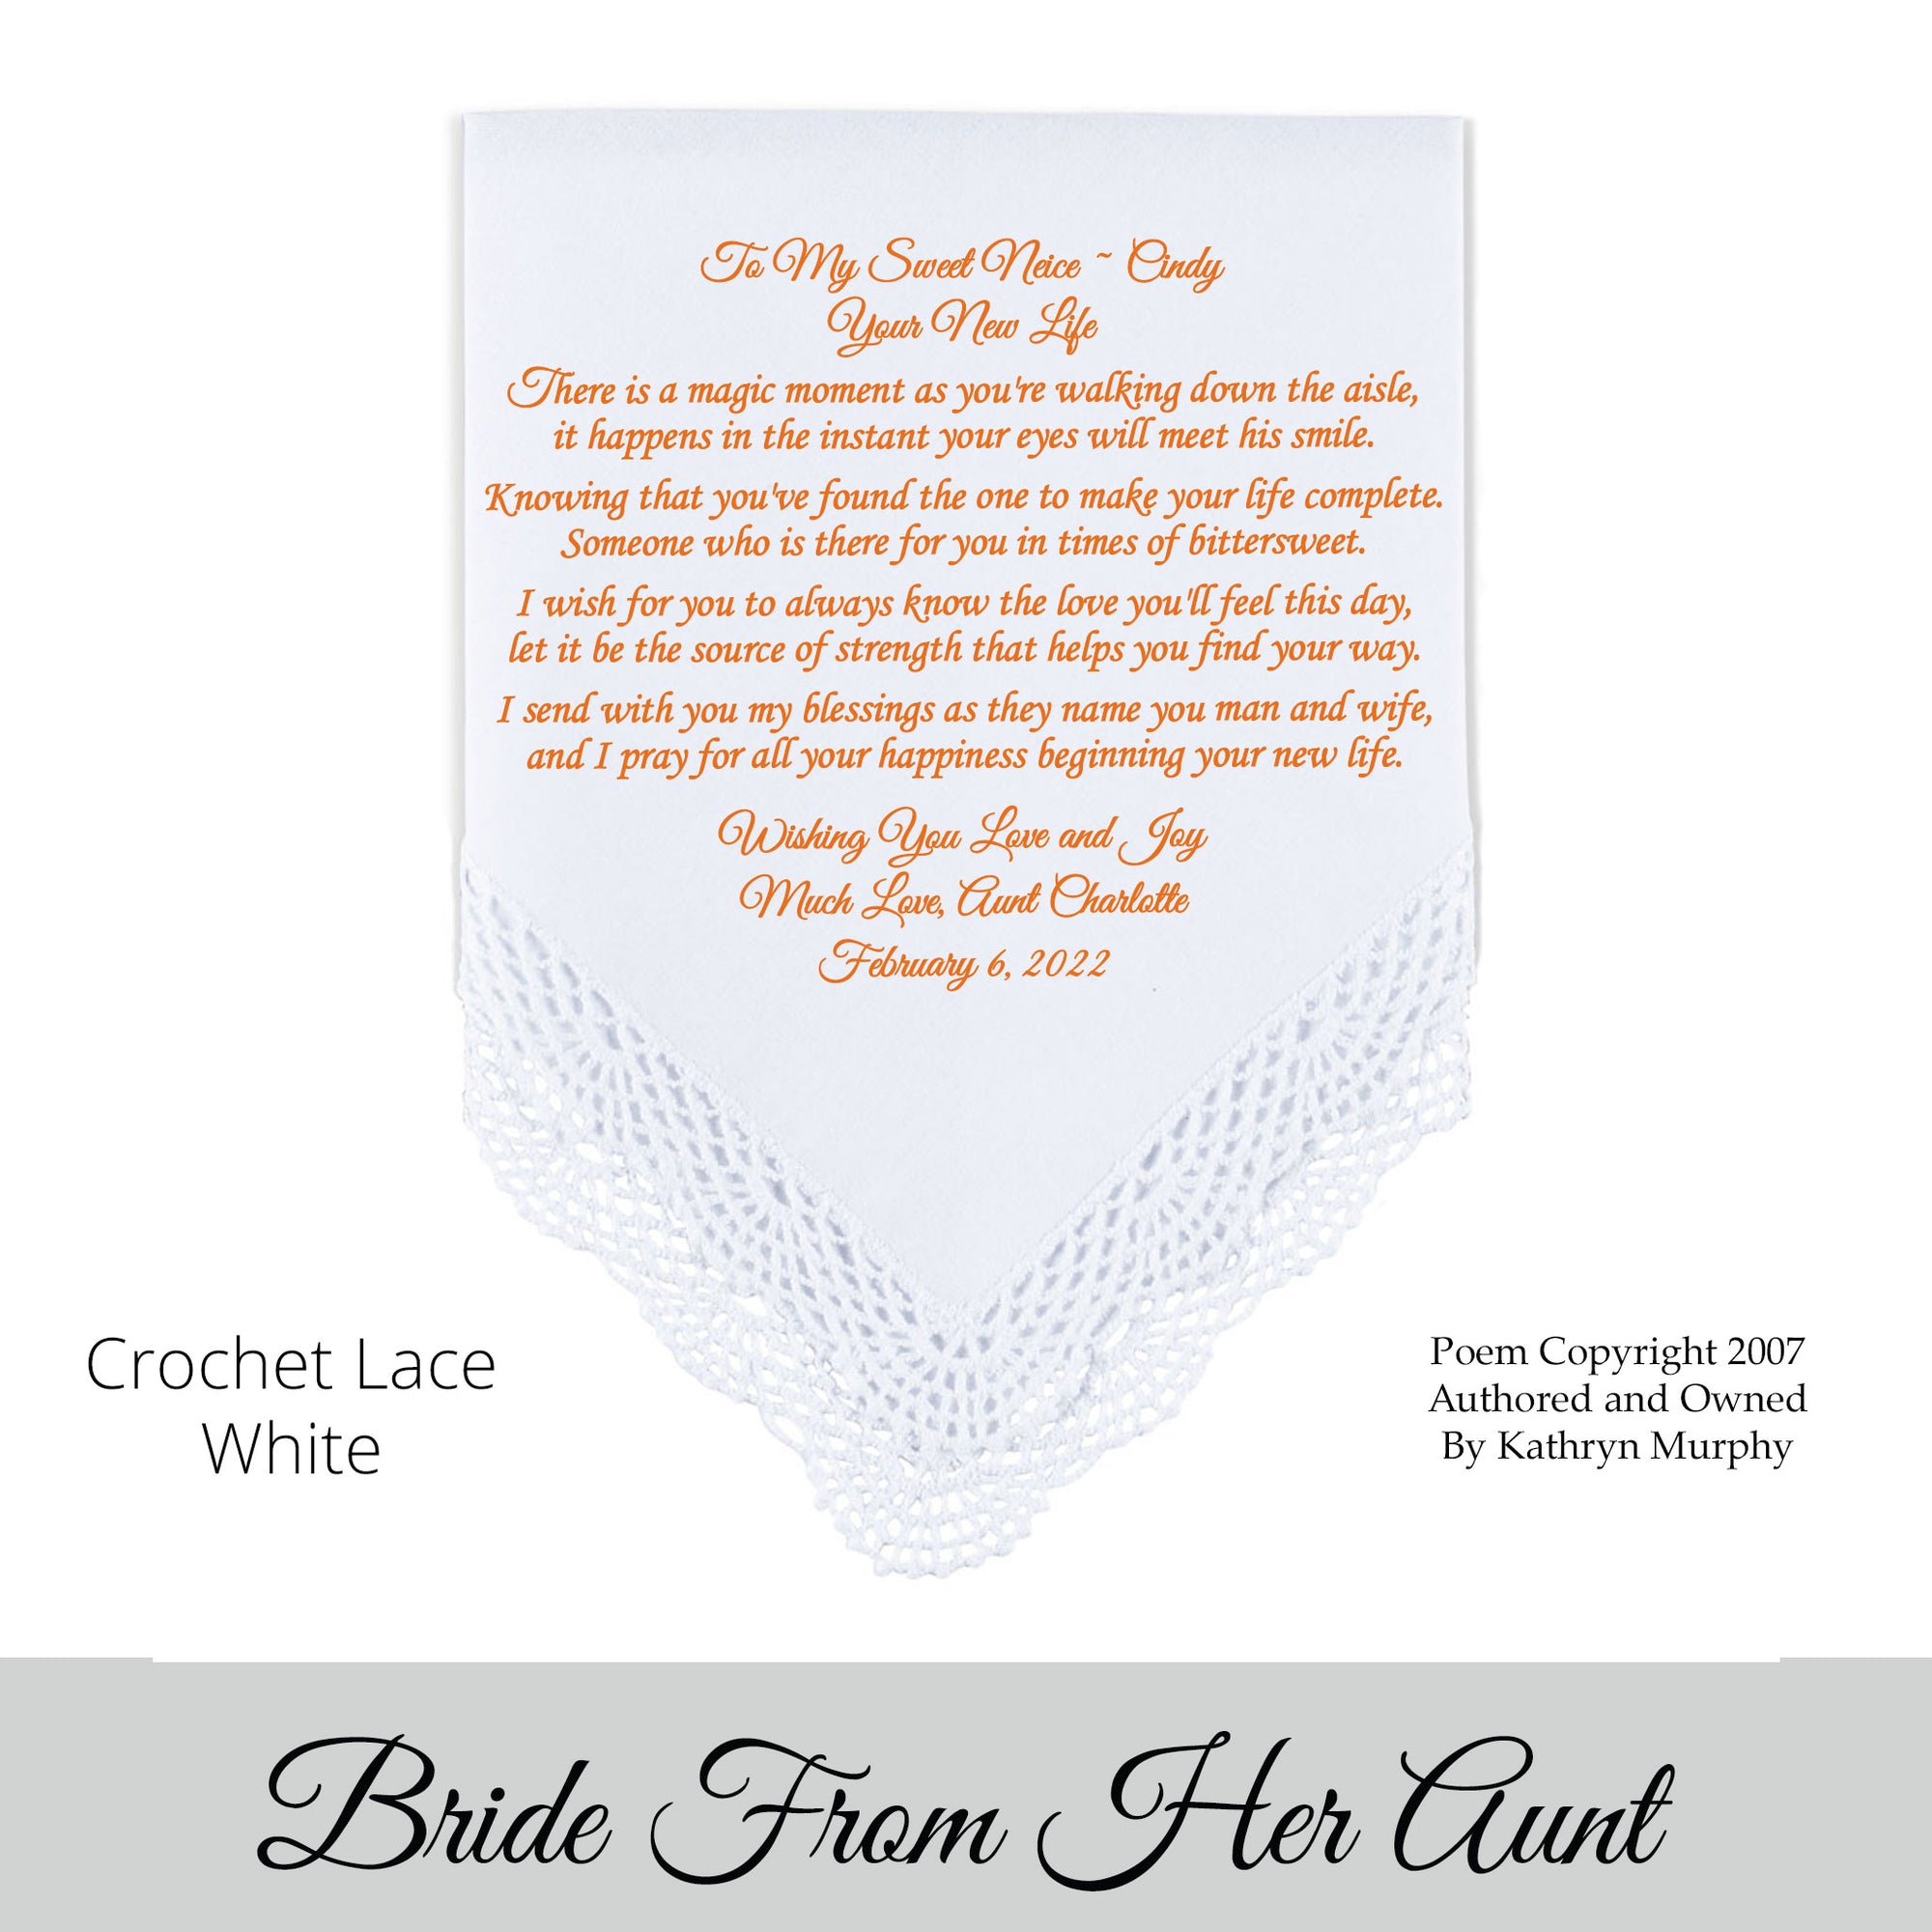 Wedding Hankie With Poem For the Bride From Her Aunt "Your New Life"